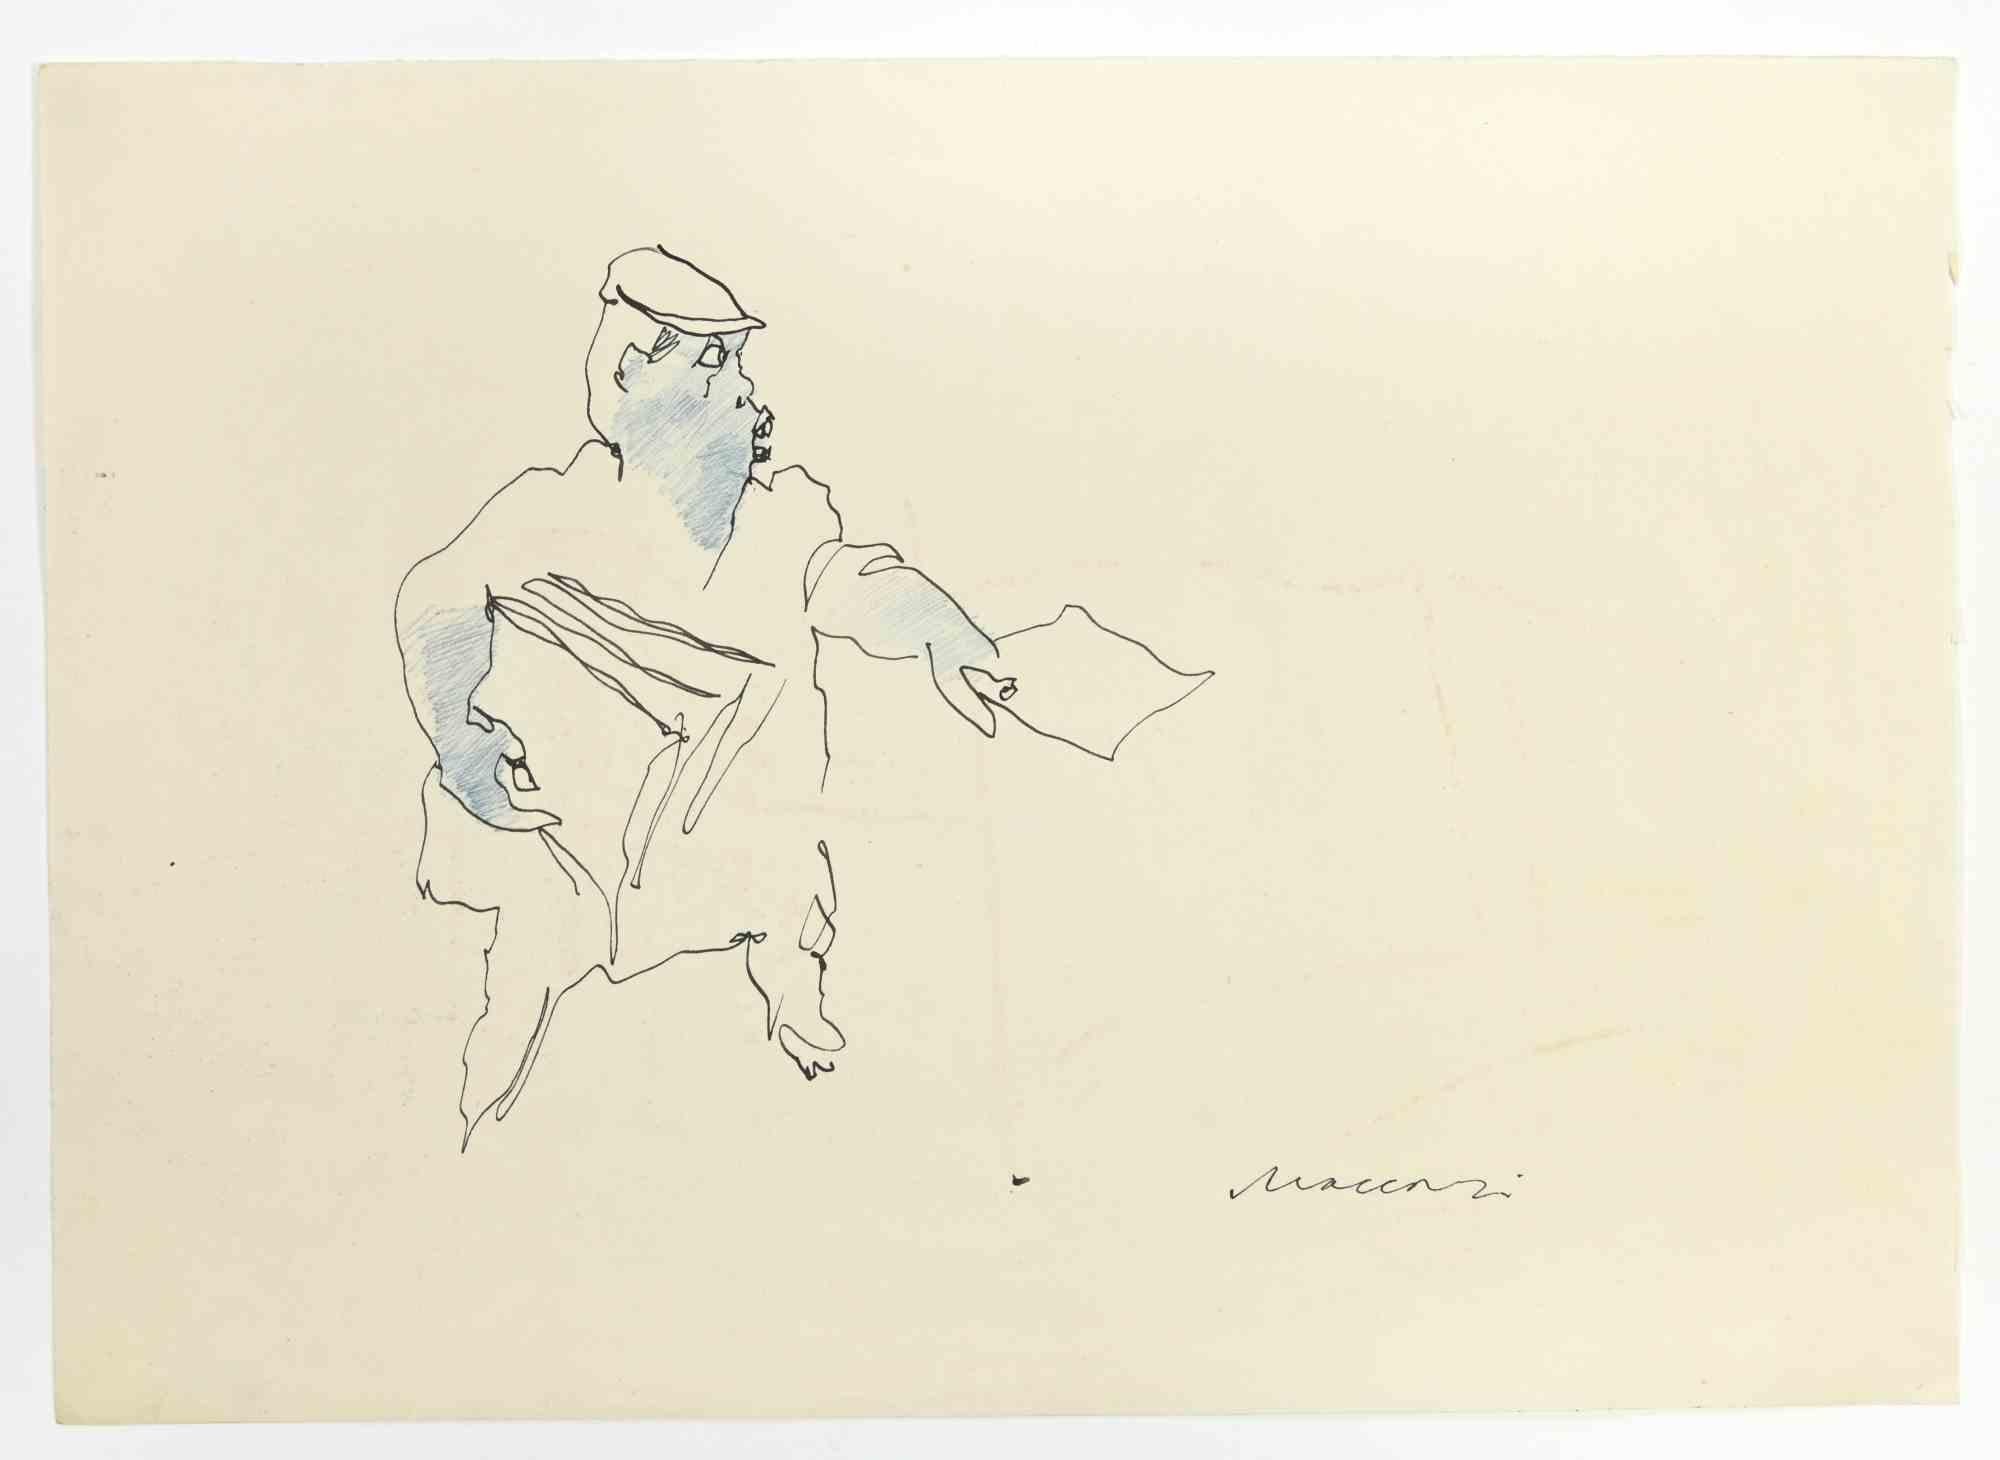 Newsie is a Pen Drawing realized by Mino Maccari  (1924-1989) in the 1960s.

Hand-signed on the lower.

Good condition with slight folding.

Mino Maccari (Siena, 1924-Rome, June 16, 1989) was an Italian writer, painter, engraver and journalist,